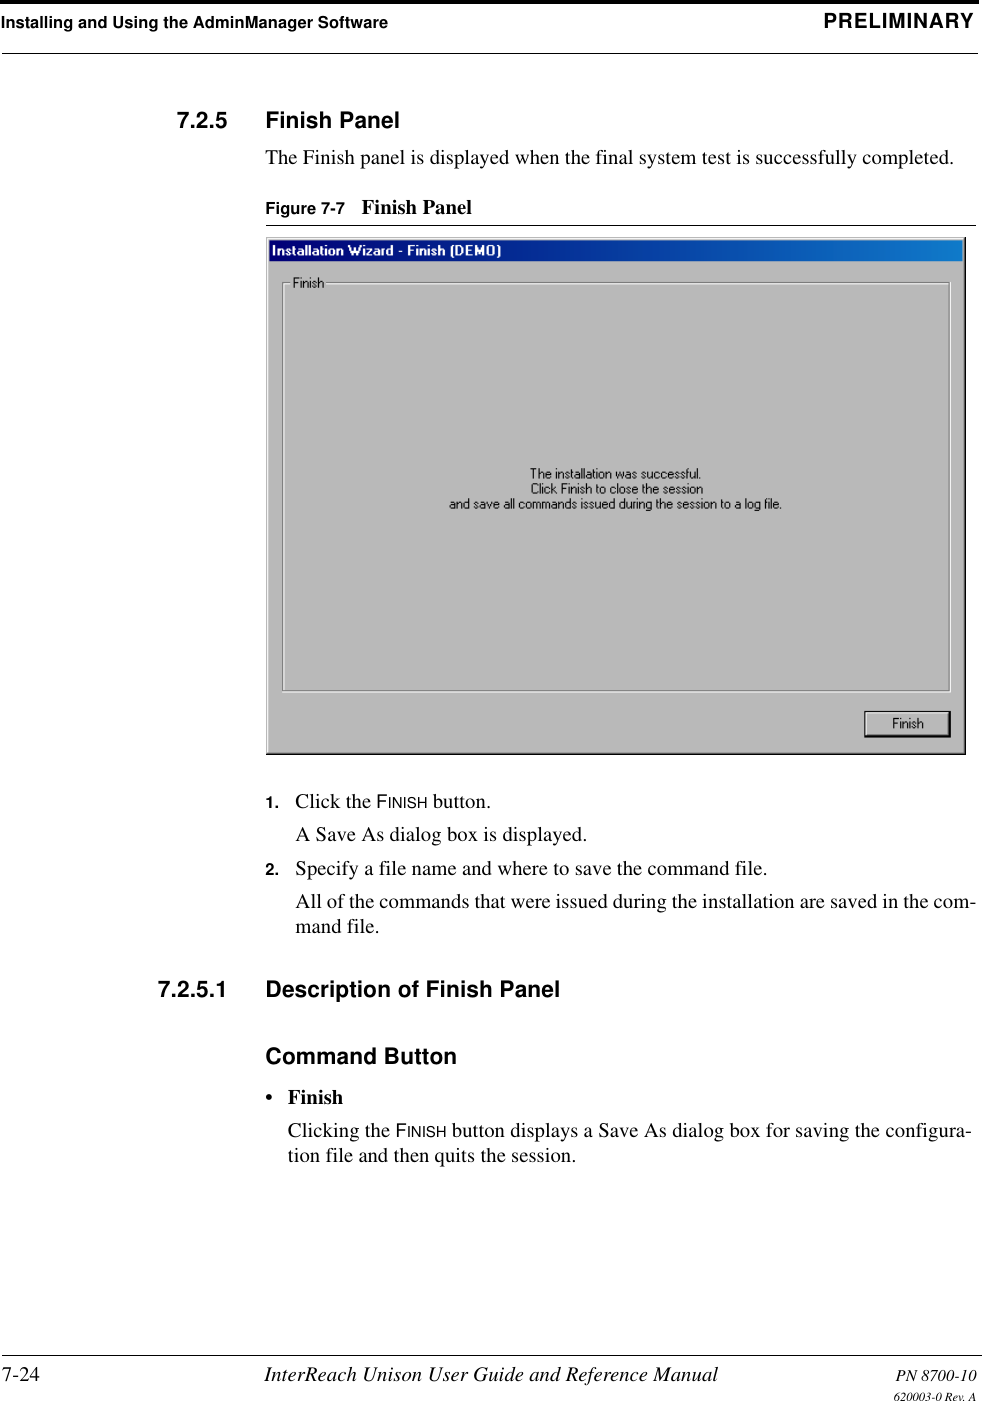 Installing and Using the AdminManager Software PRELIMINARY7-24 InterReach Unison User Guide and Reference Manual PN 8700-10620003-0 Rev. A7.2.5 Finish PanelThe Finish panel is displayed when the final system test is successfully completed.Figure 7-7 Finish Panel1. Click the FINISH button.A Save As dialog box is displayed.2. Specify a file name and where to save the command file.All of the commands that were issued during the installation are saved in the com-mand file.7.2.5.1 Description of Finish PanelCommand Button• FinishClicking the FINISH button displays a Save As dialog box for saving the configura-tion file and then quits the session.